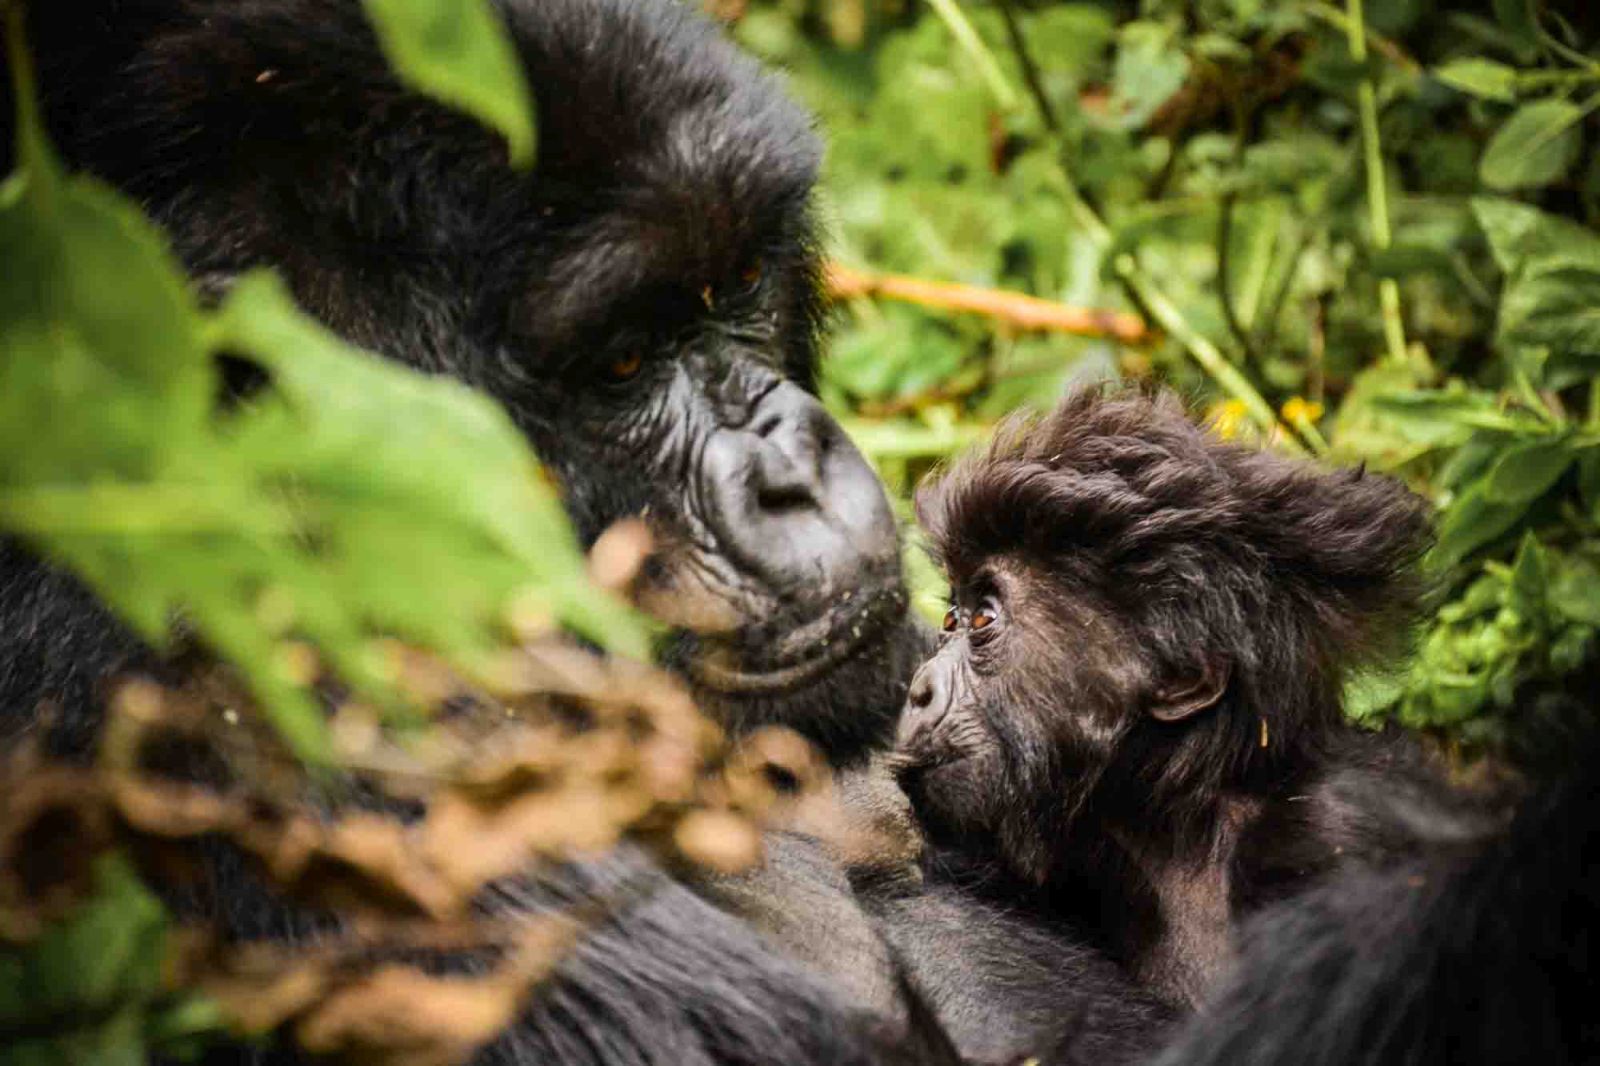 A close up picture of a gorilla and her baby in Rwanda